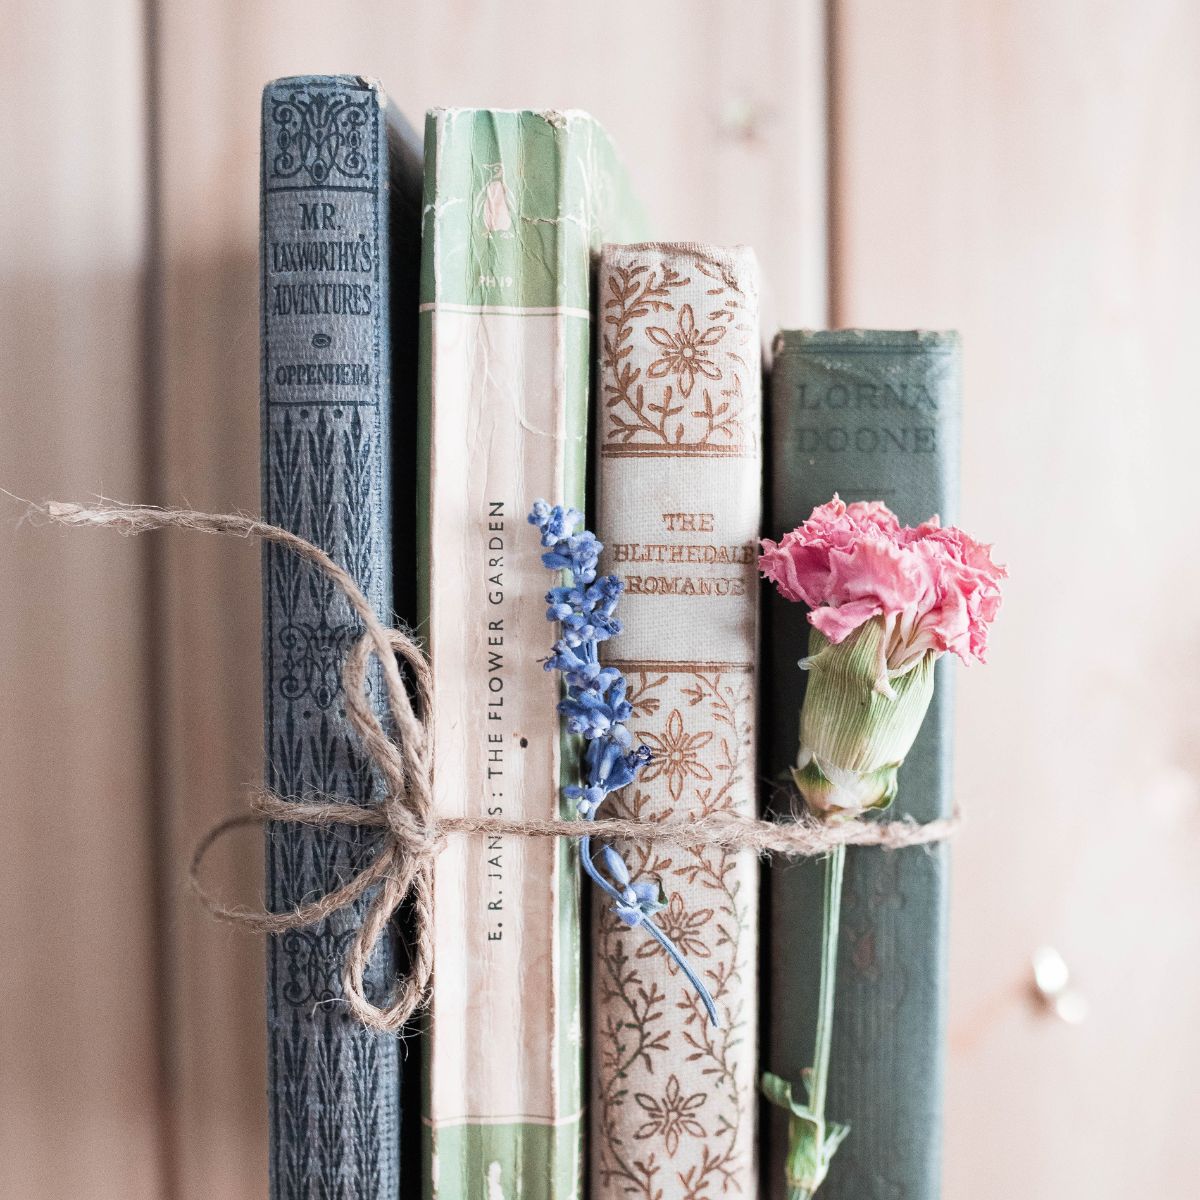 A bundle of books tied with twine has a pink carnation tucked in.